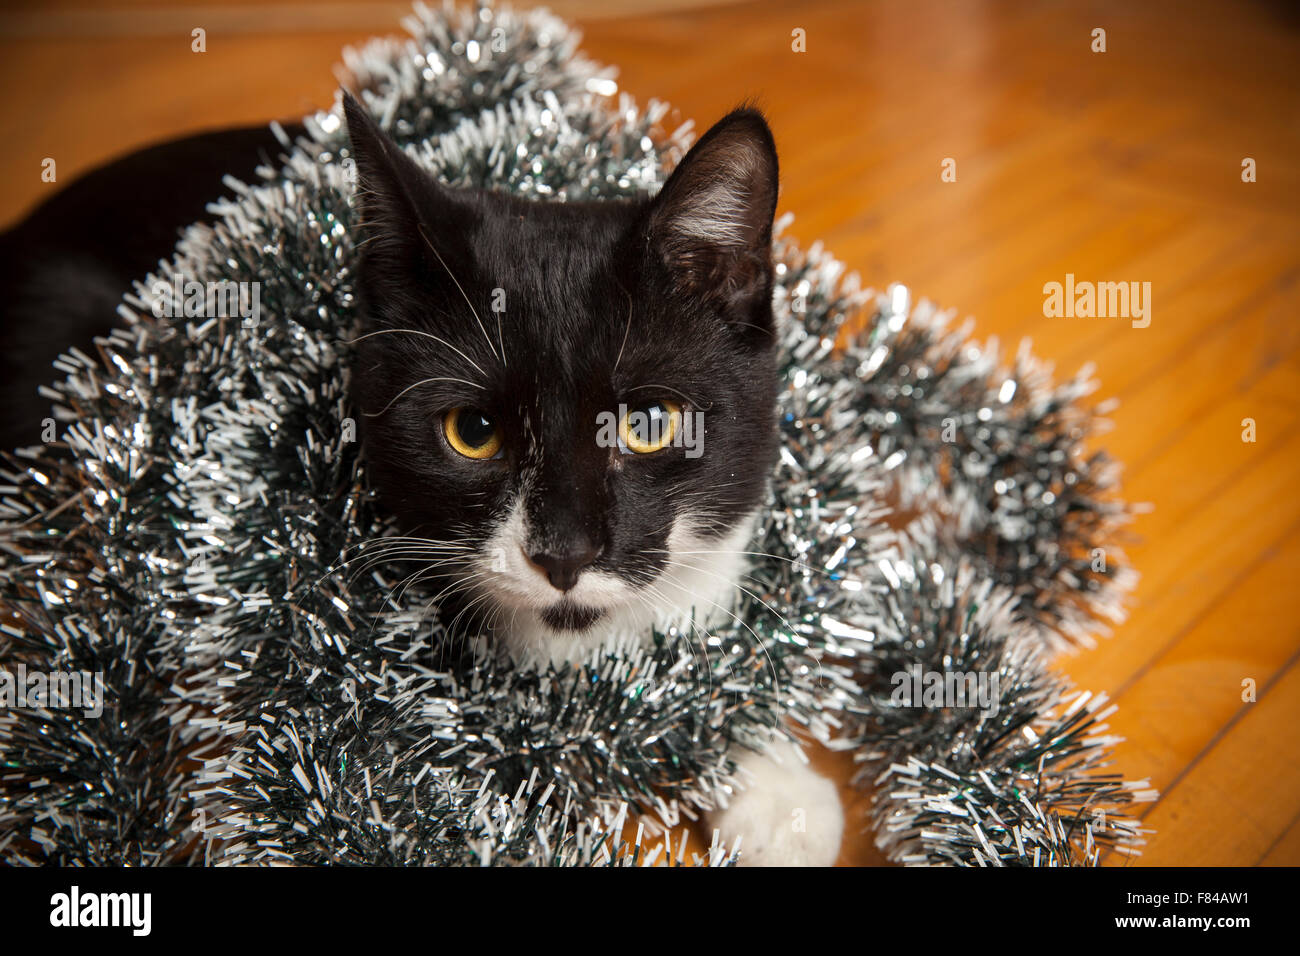 Black and white cat with Christmas decoration close up Stock Photo